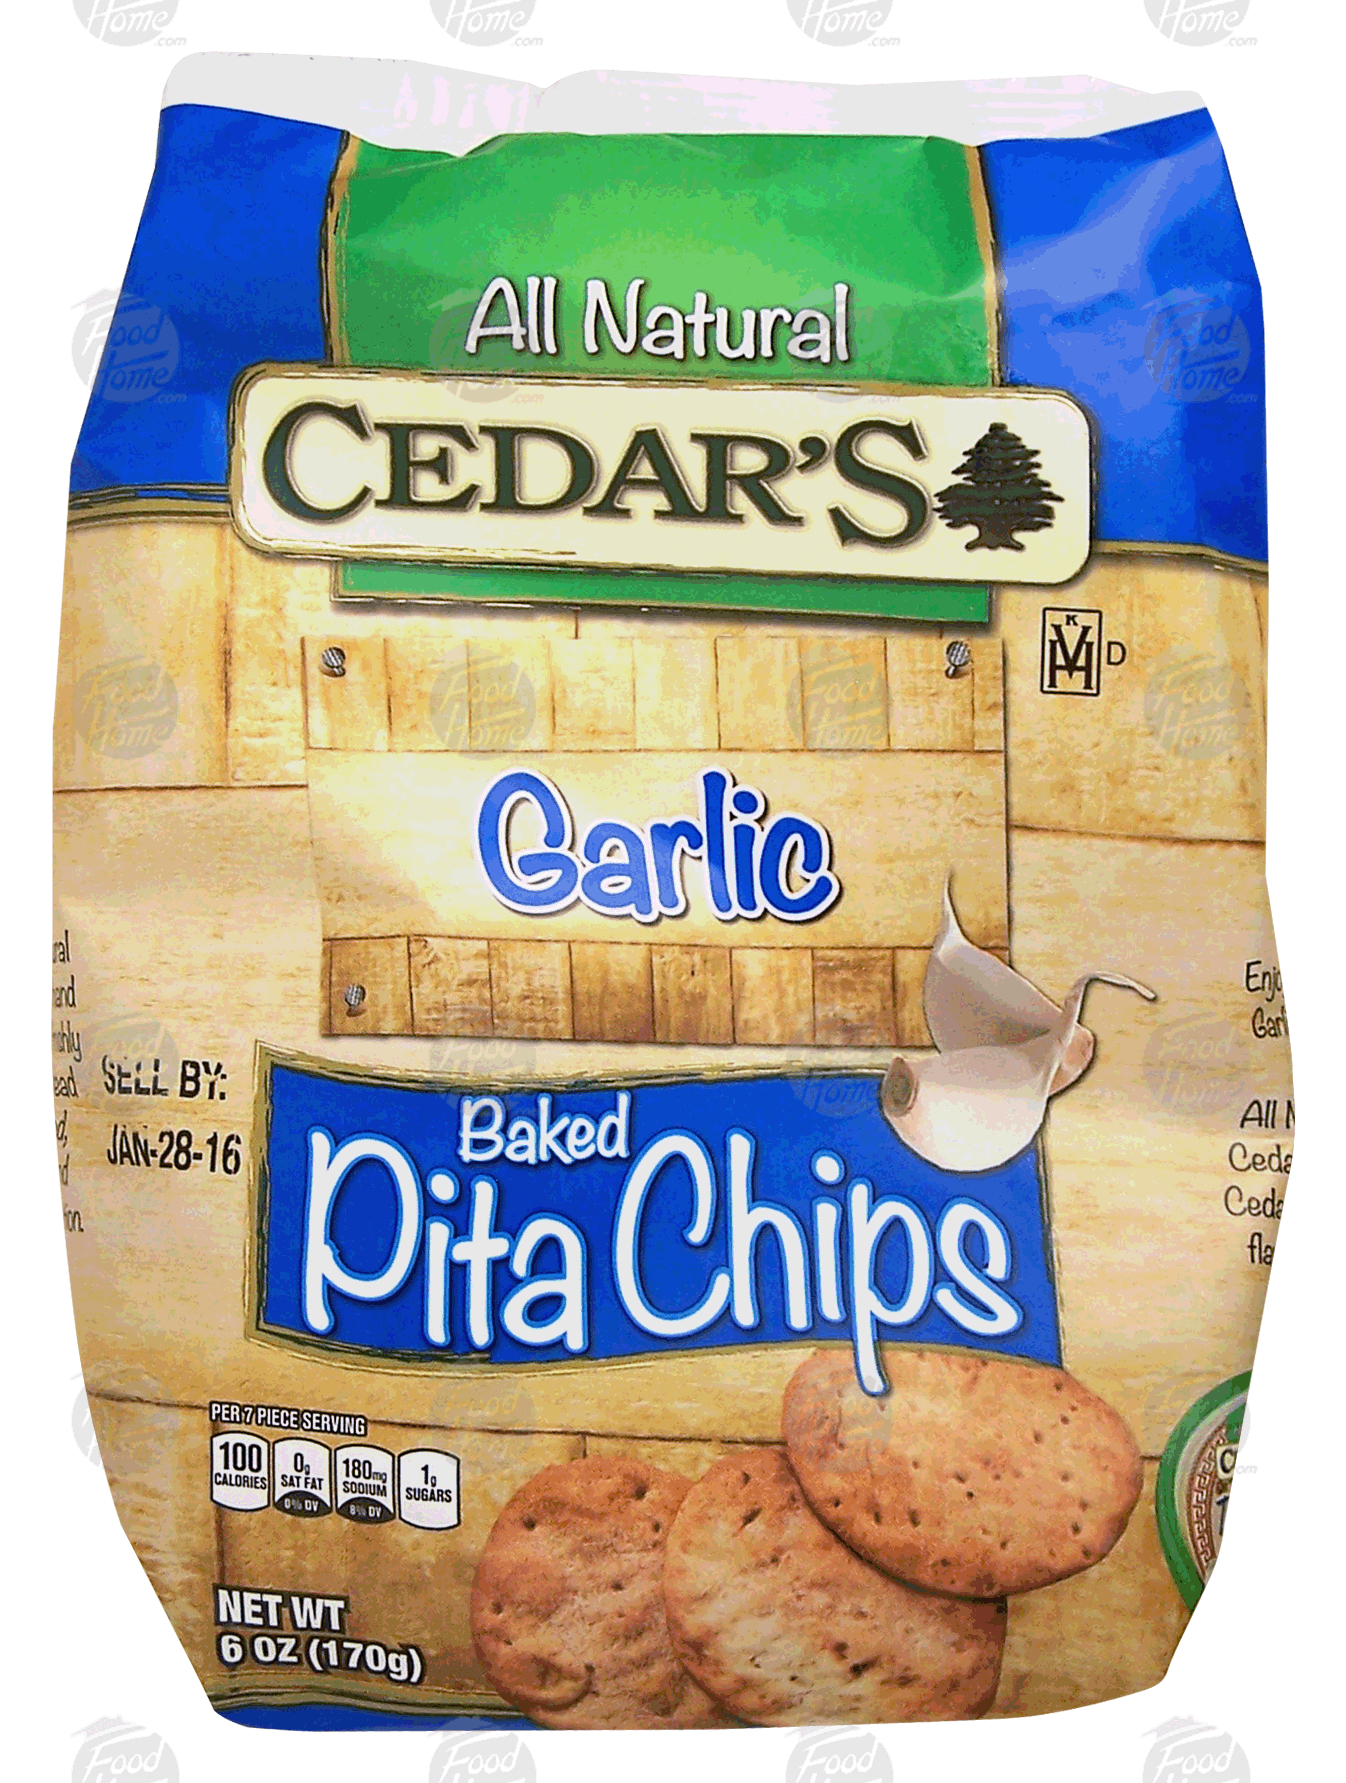 Cedar's All Natural garlic baked pita chips, all natural Full-Size Picture